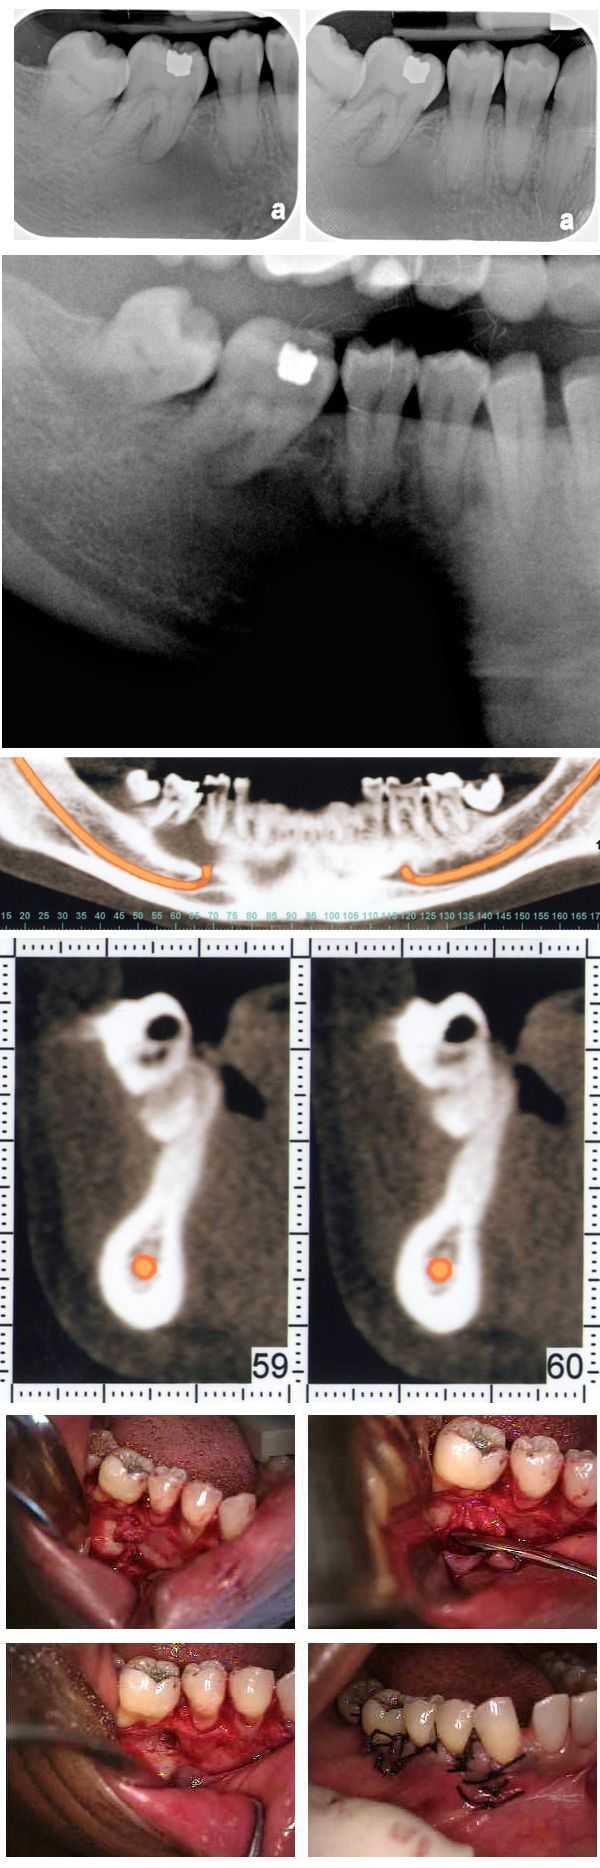 dental tooth abscess teeth, lateral periodontal cyst, mild inflamed fibrous tissue, CAT ct scan